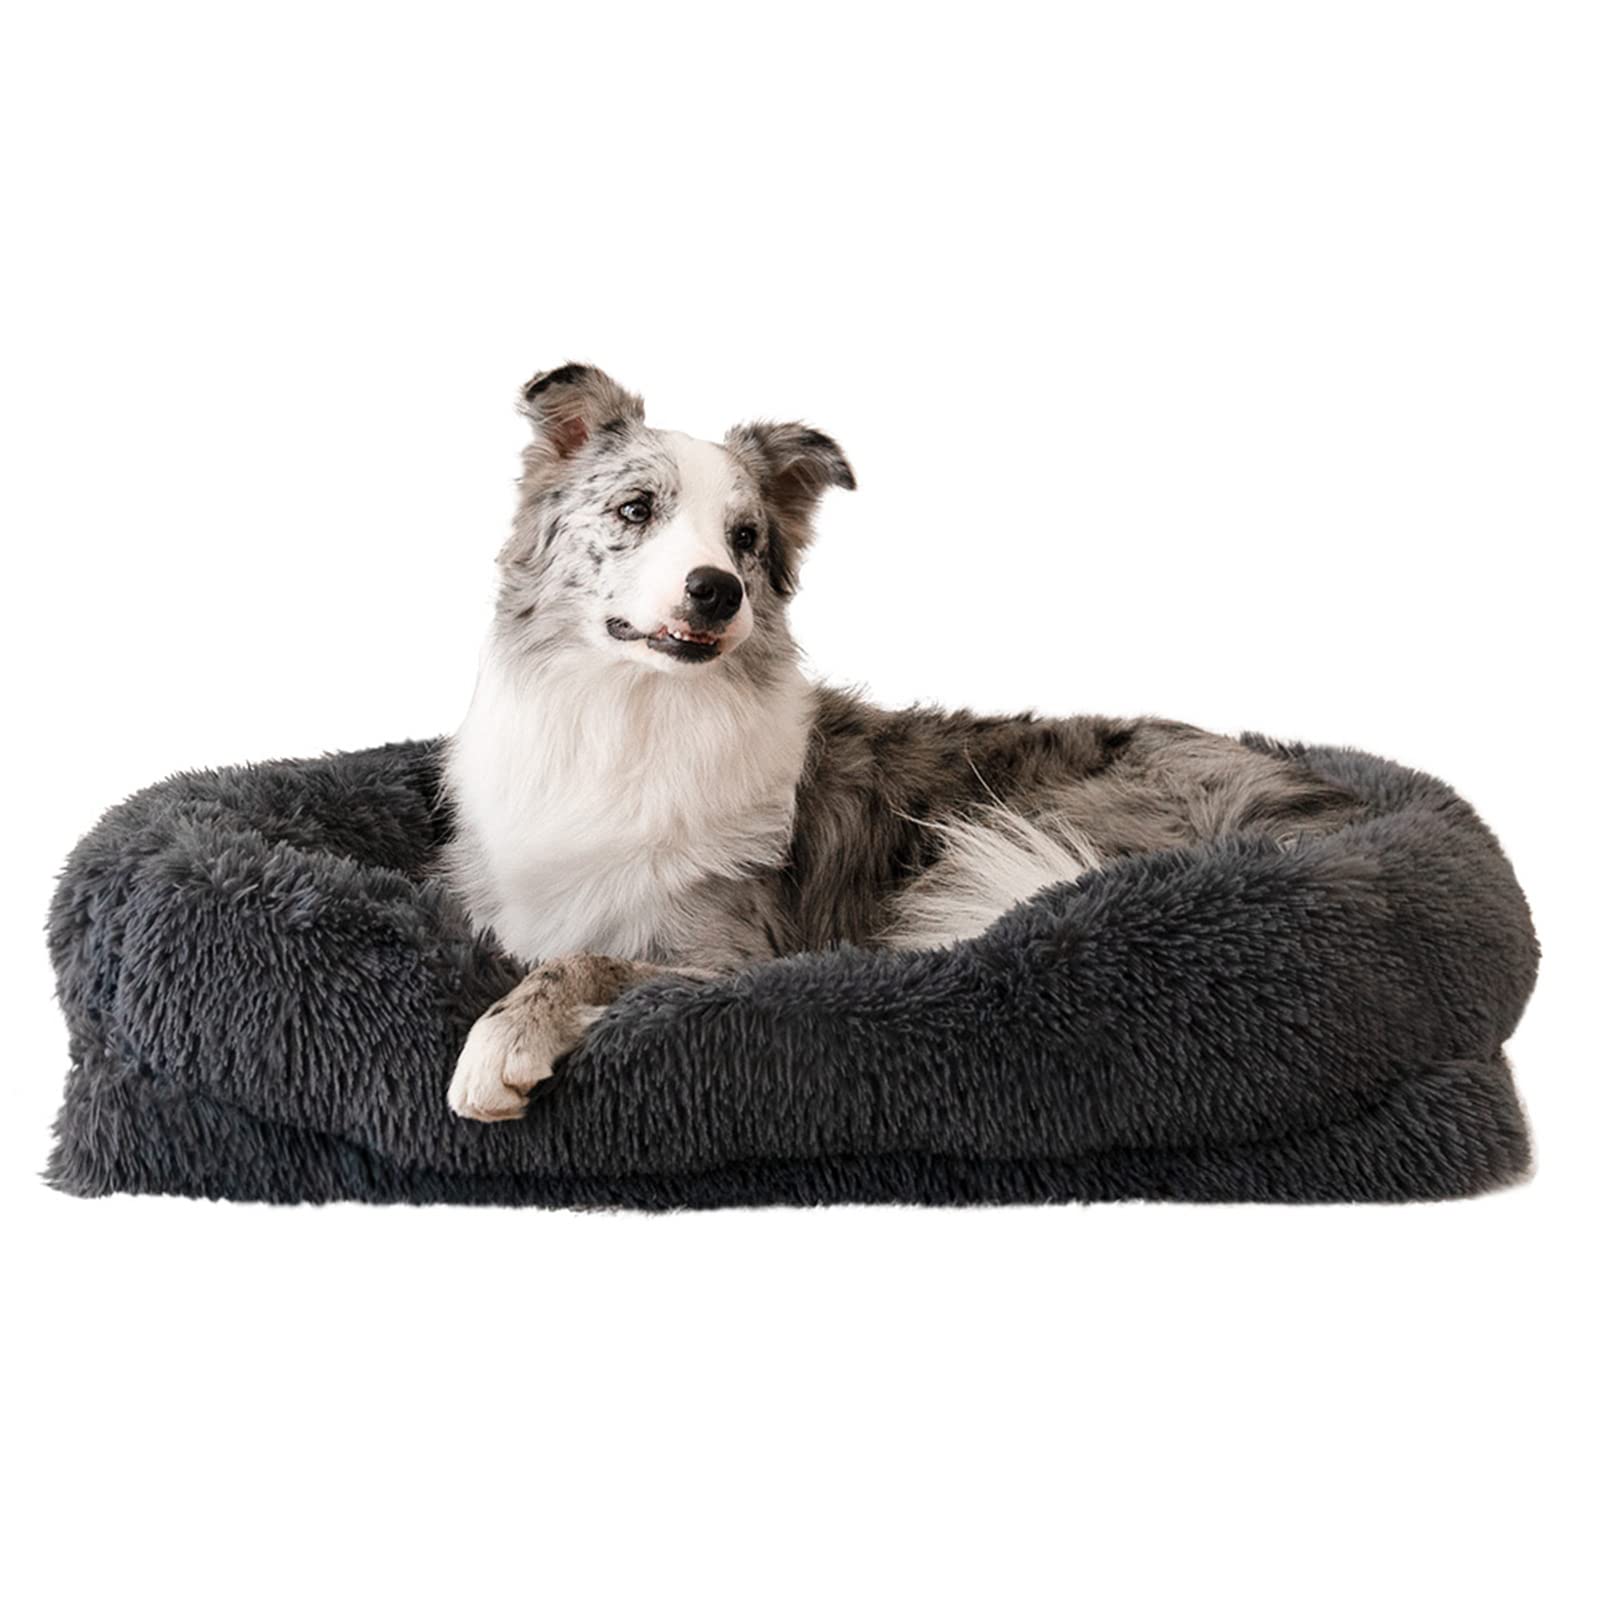 WELLYELO Large Dog Bed Cat Bed Fluffy Plush Dog Crate Beds for Large Dogs Anti-Slip Pet Bed Dog Crate Pad Sleeping Mat Machine W